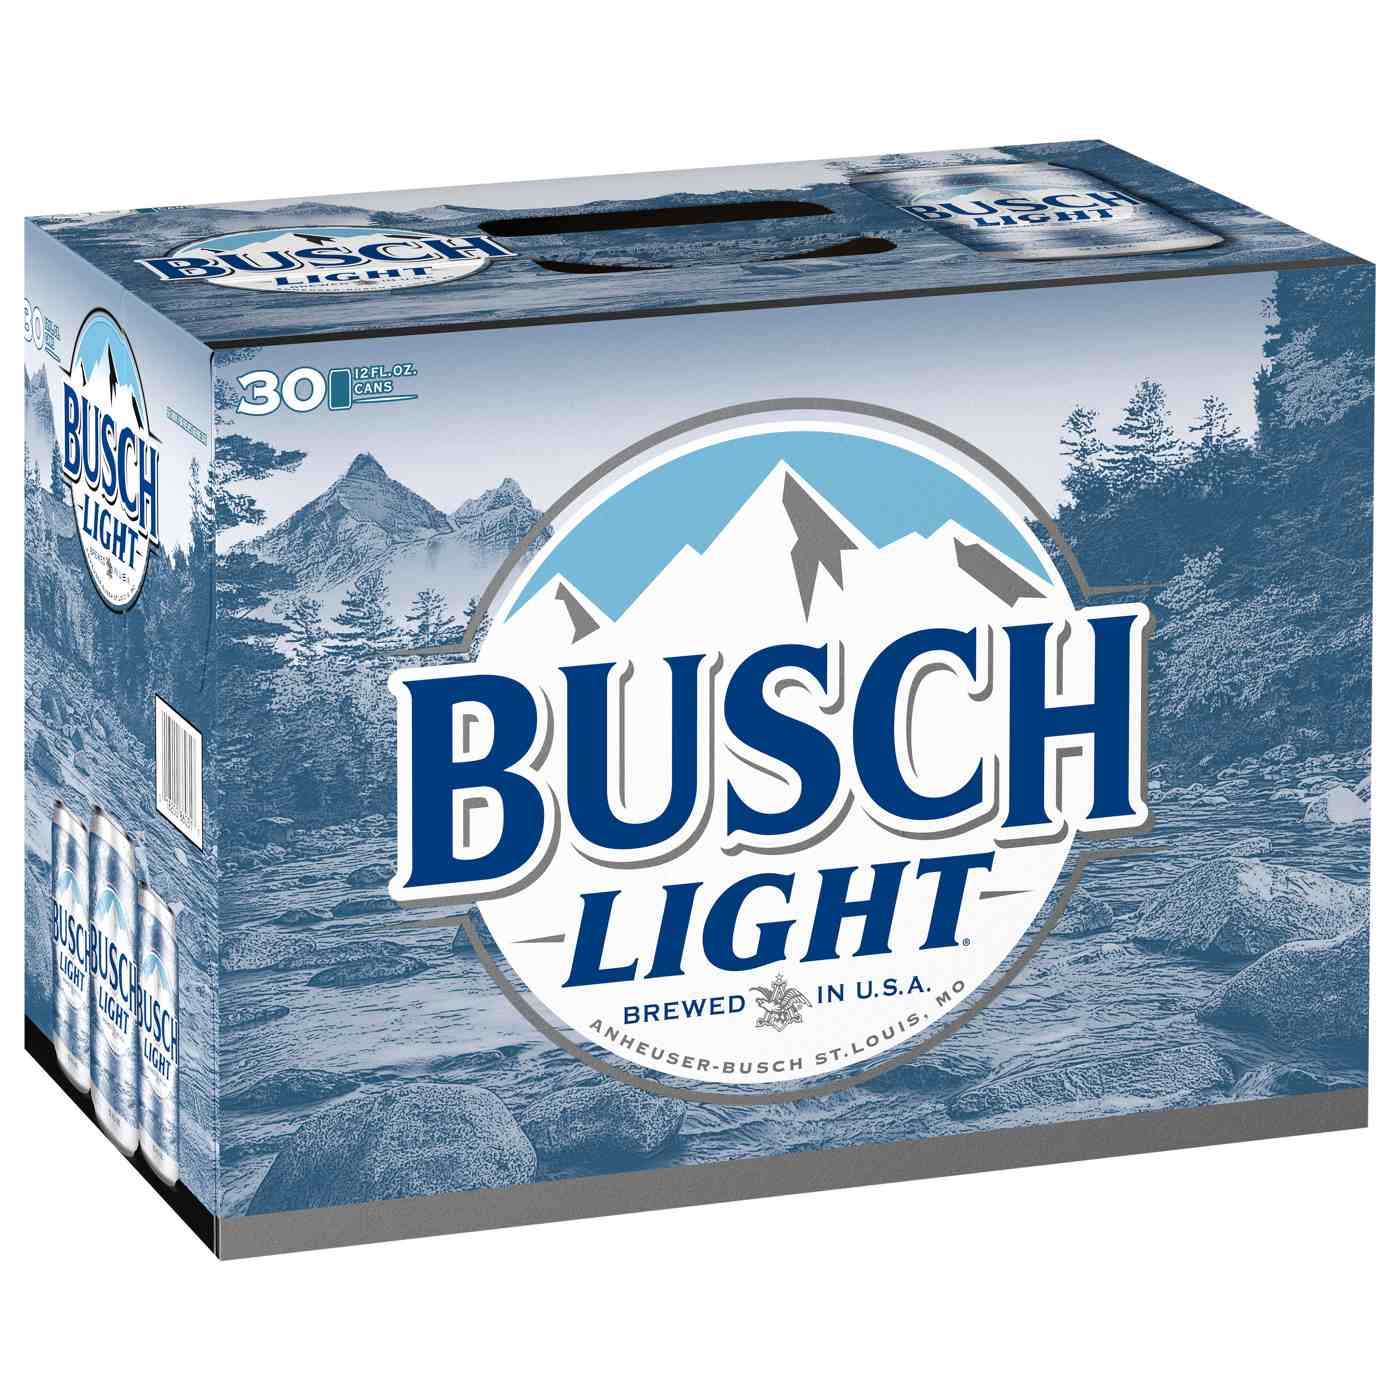 Busch Light Beer 30 pk Cans; image 1 of 2